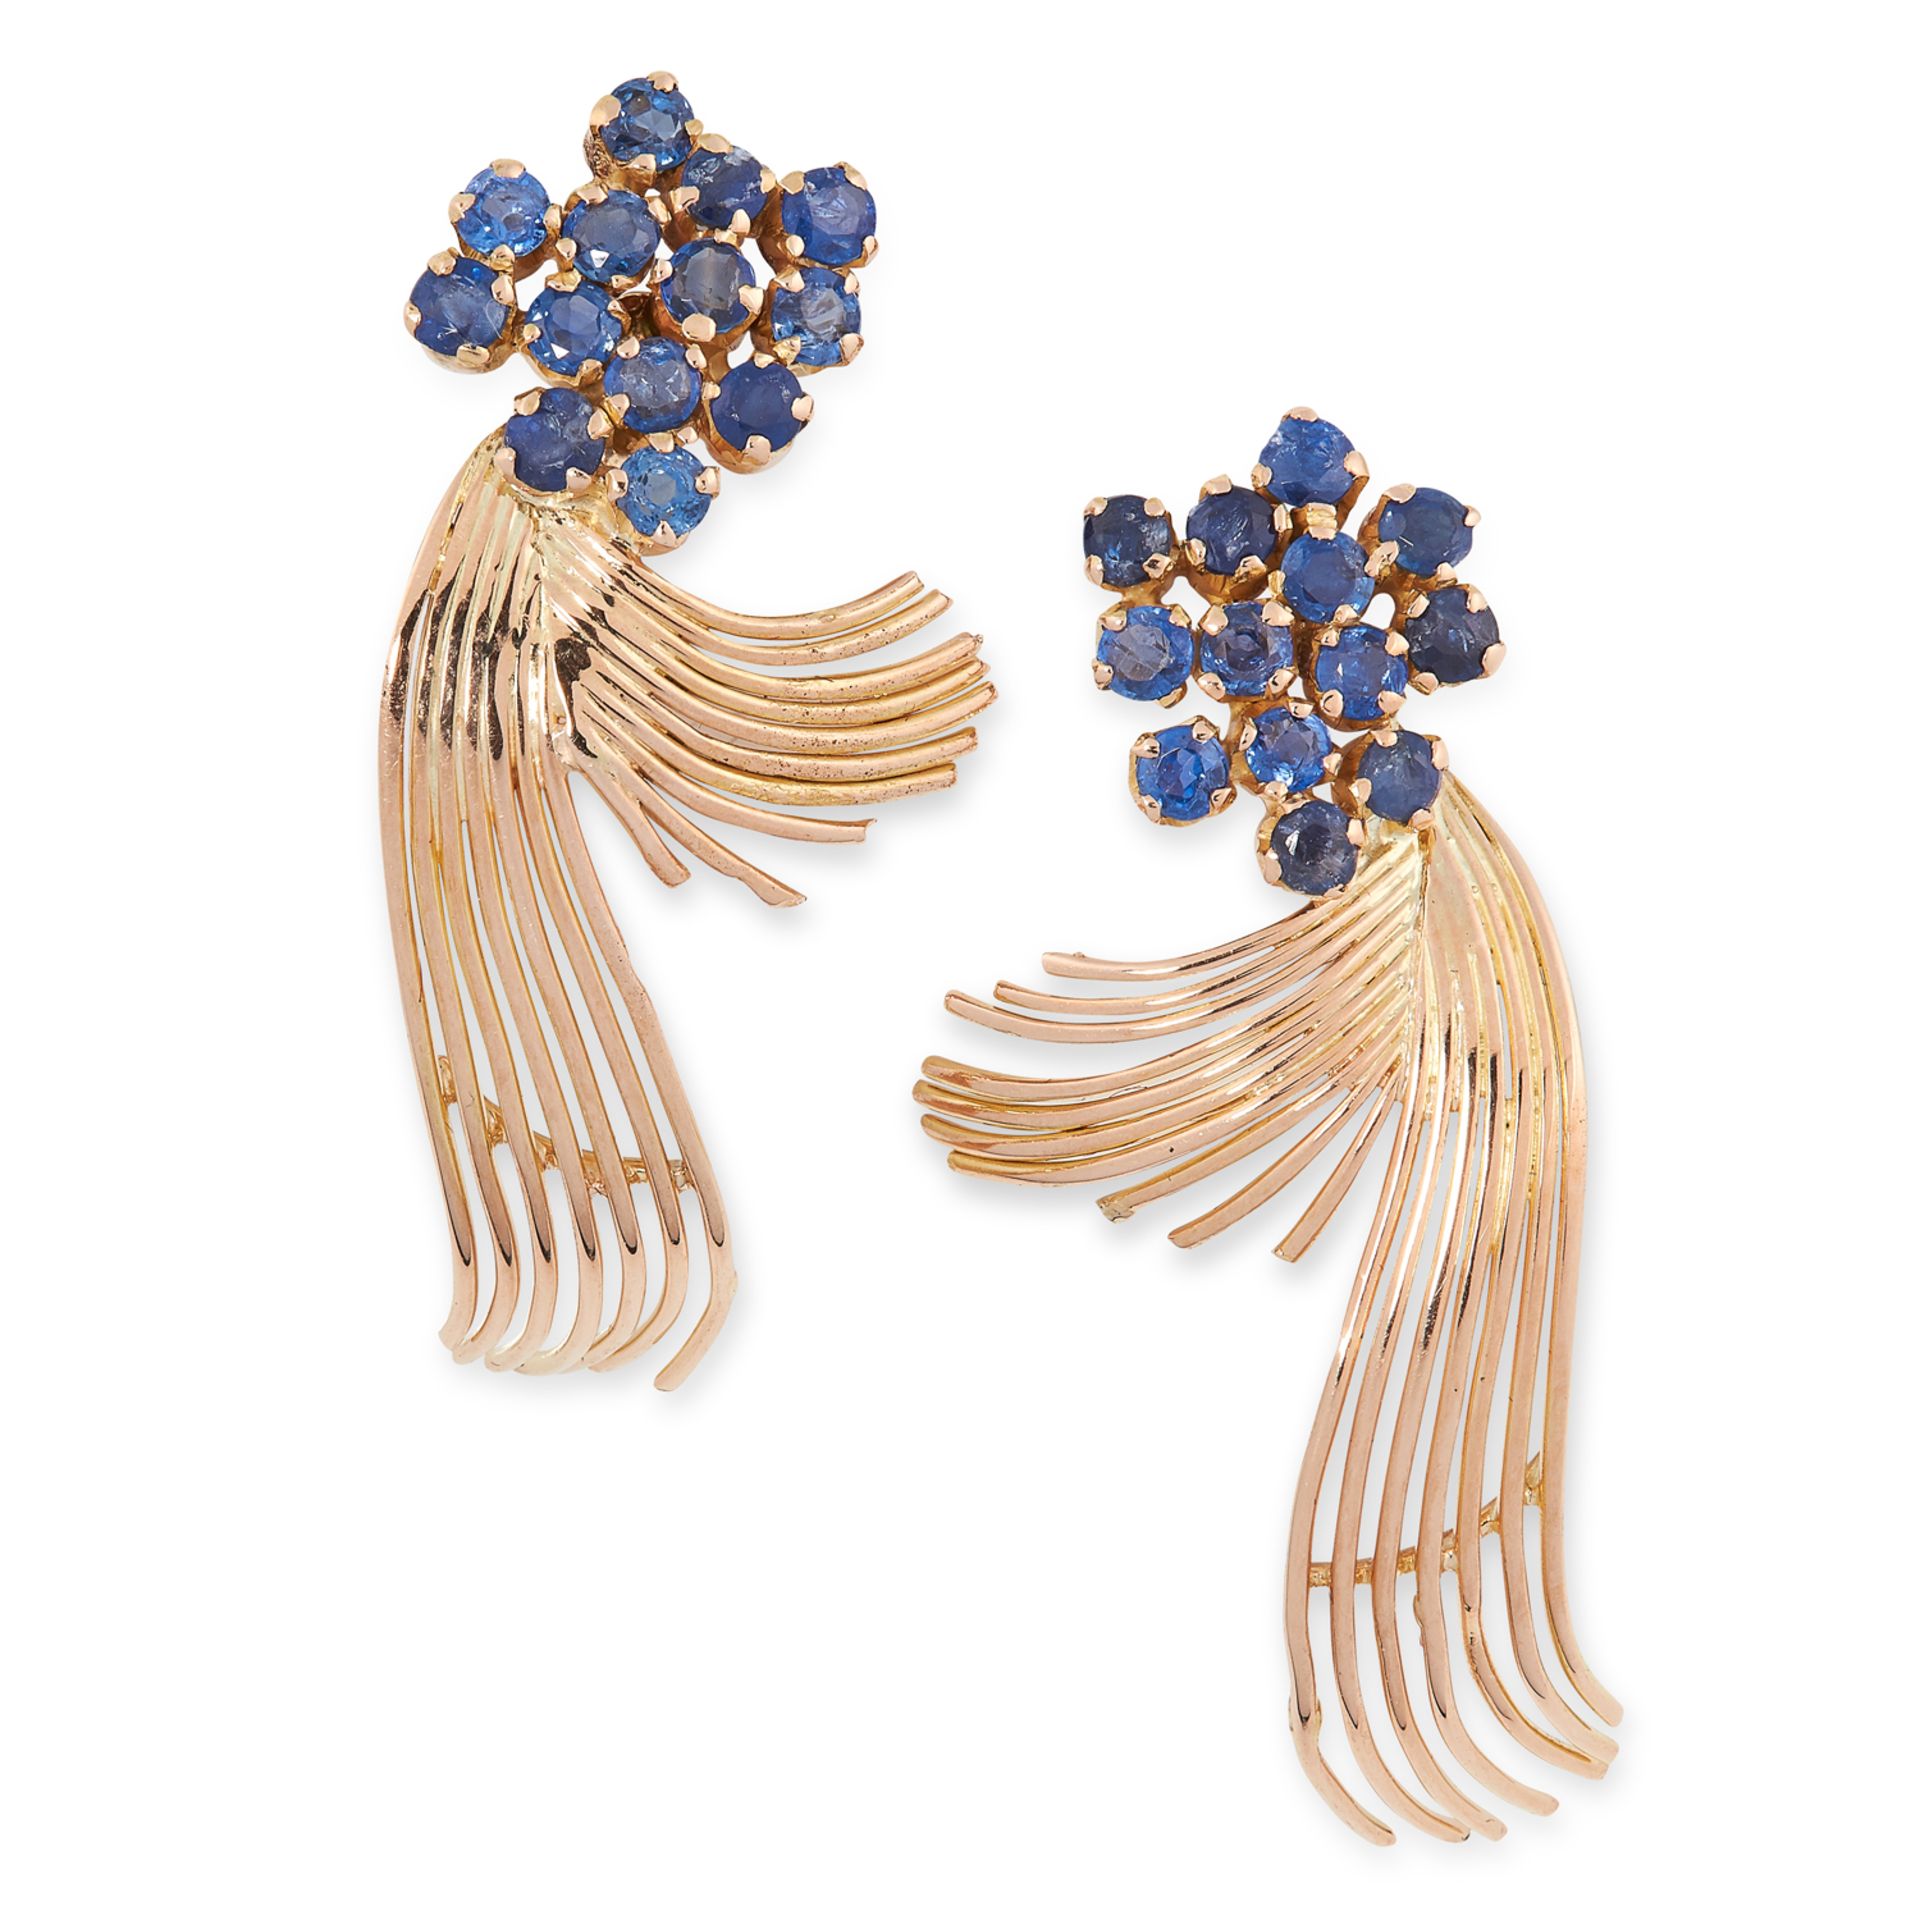 A PAIR OF VINTAGE SAPPHIRE CLUSTER EARRINGS set with round cut sapphires, with an abstract gold